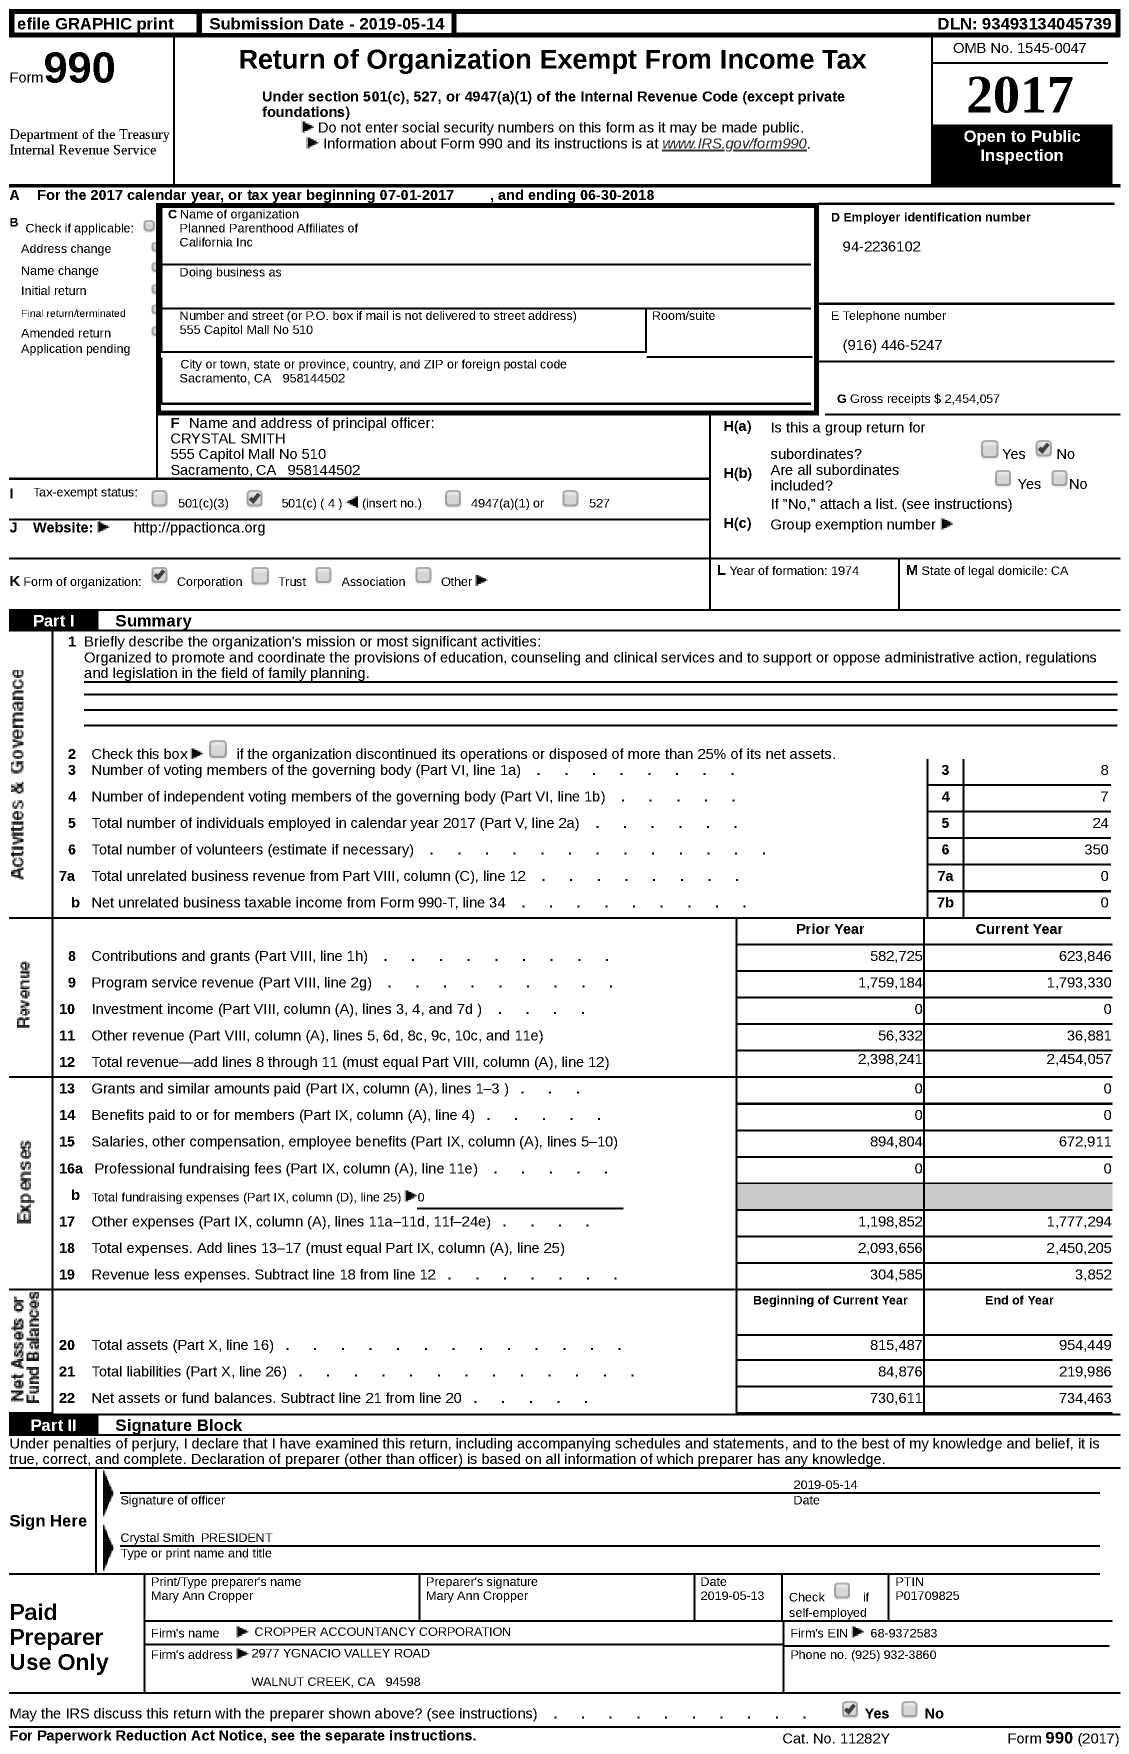 Image of first page of 2017 Form 990 for Planned Parenthood Affiliates of California (PPAC)